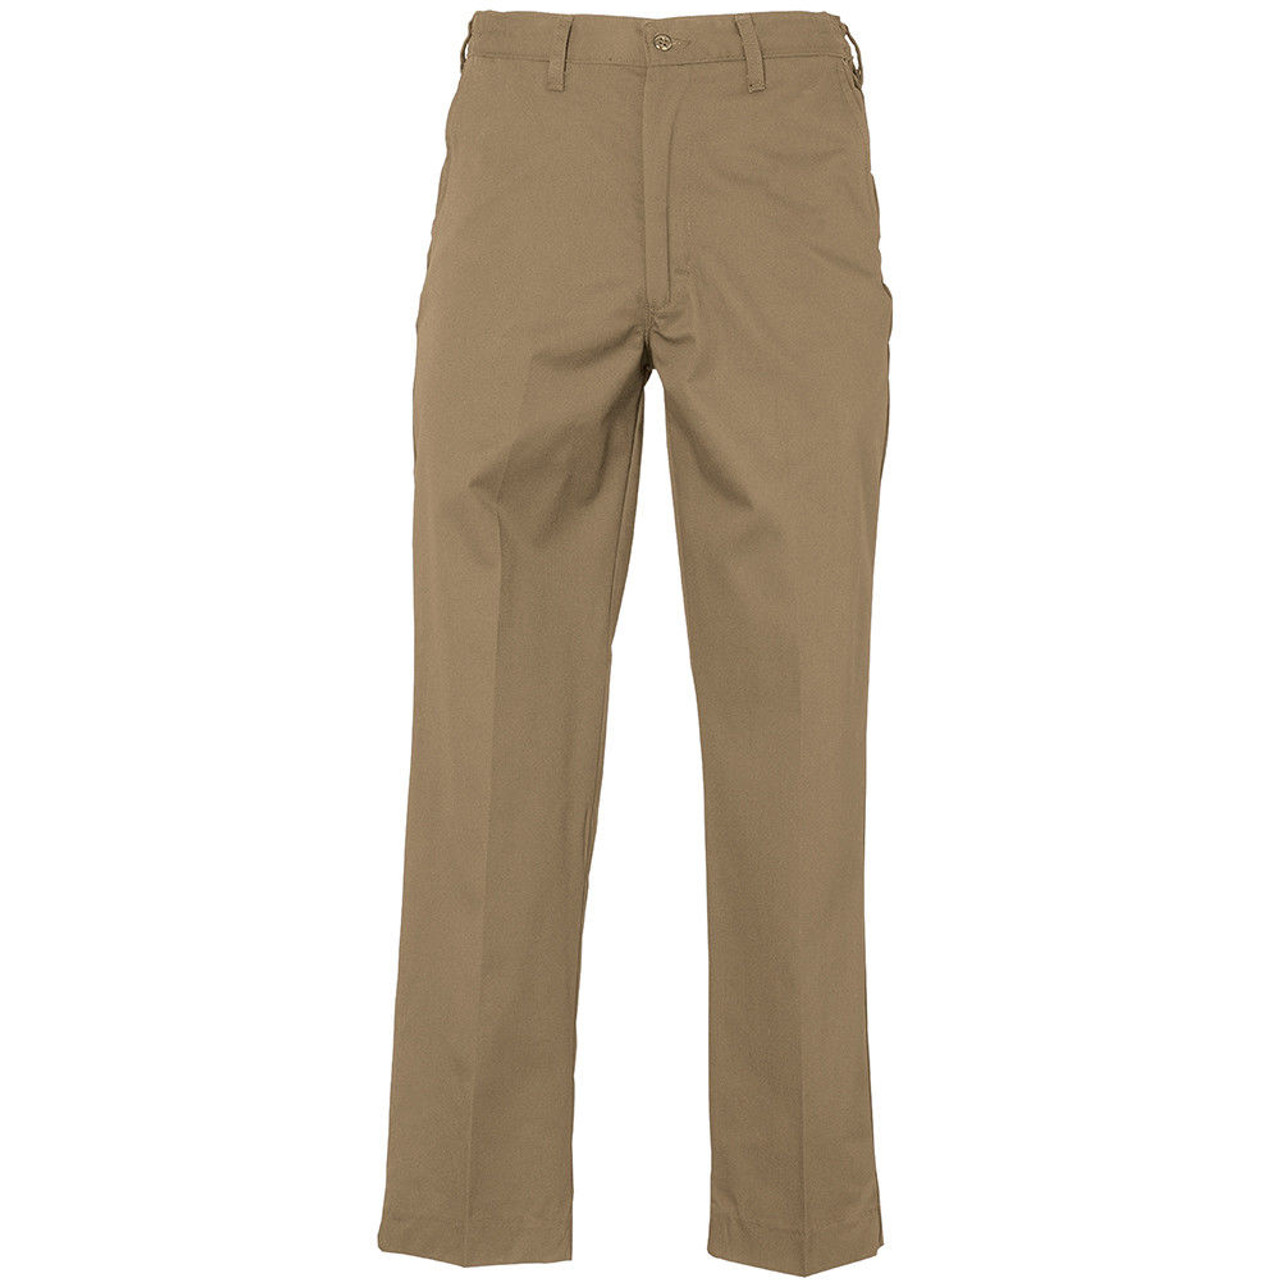 Buy Classic Gurkha Pants / Trousers, in 100% Cotton or Linen, 21 Colours,  Hand Made Bespoke, Wide, Regular, Slim, Beige, Khaki, Navy, Black Online in  India - Etsy